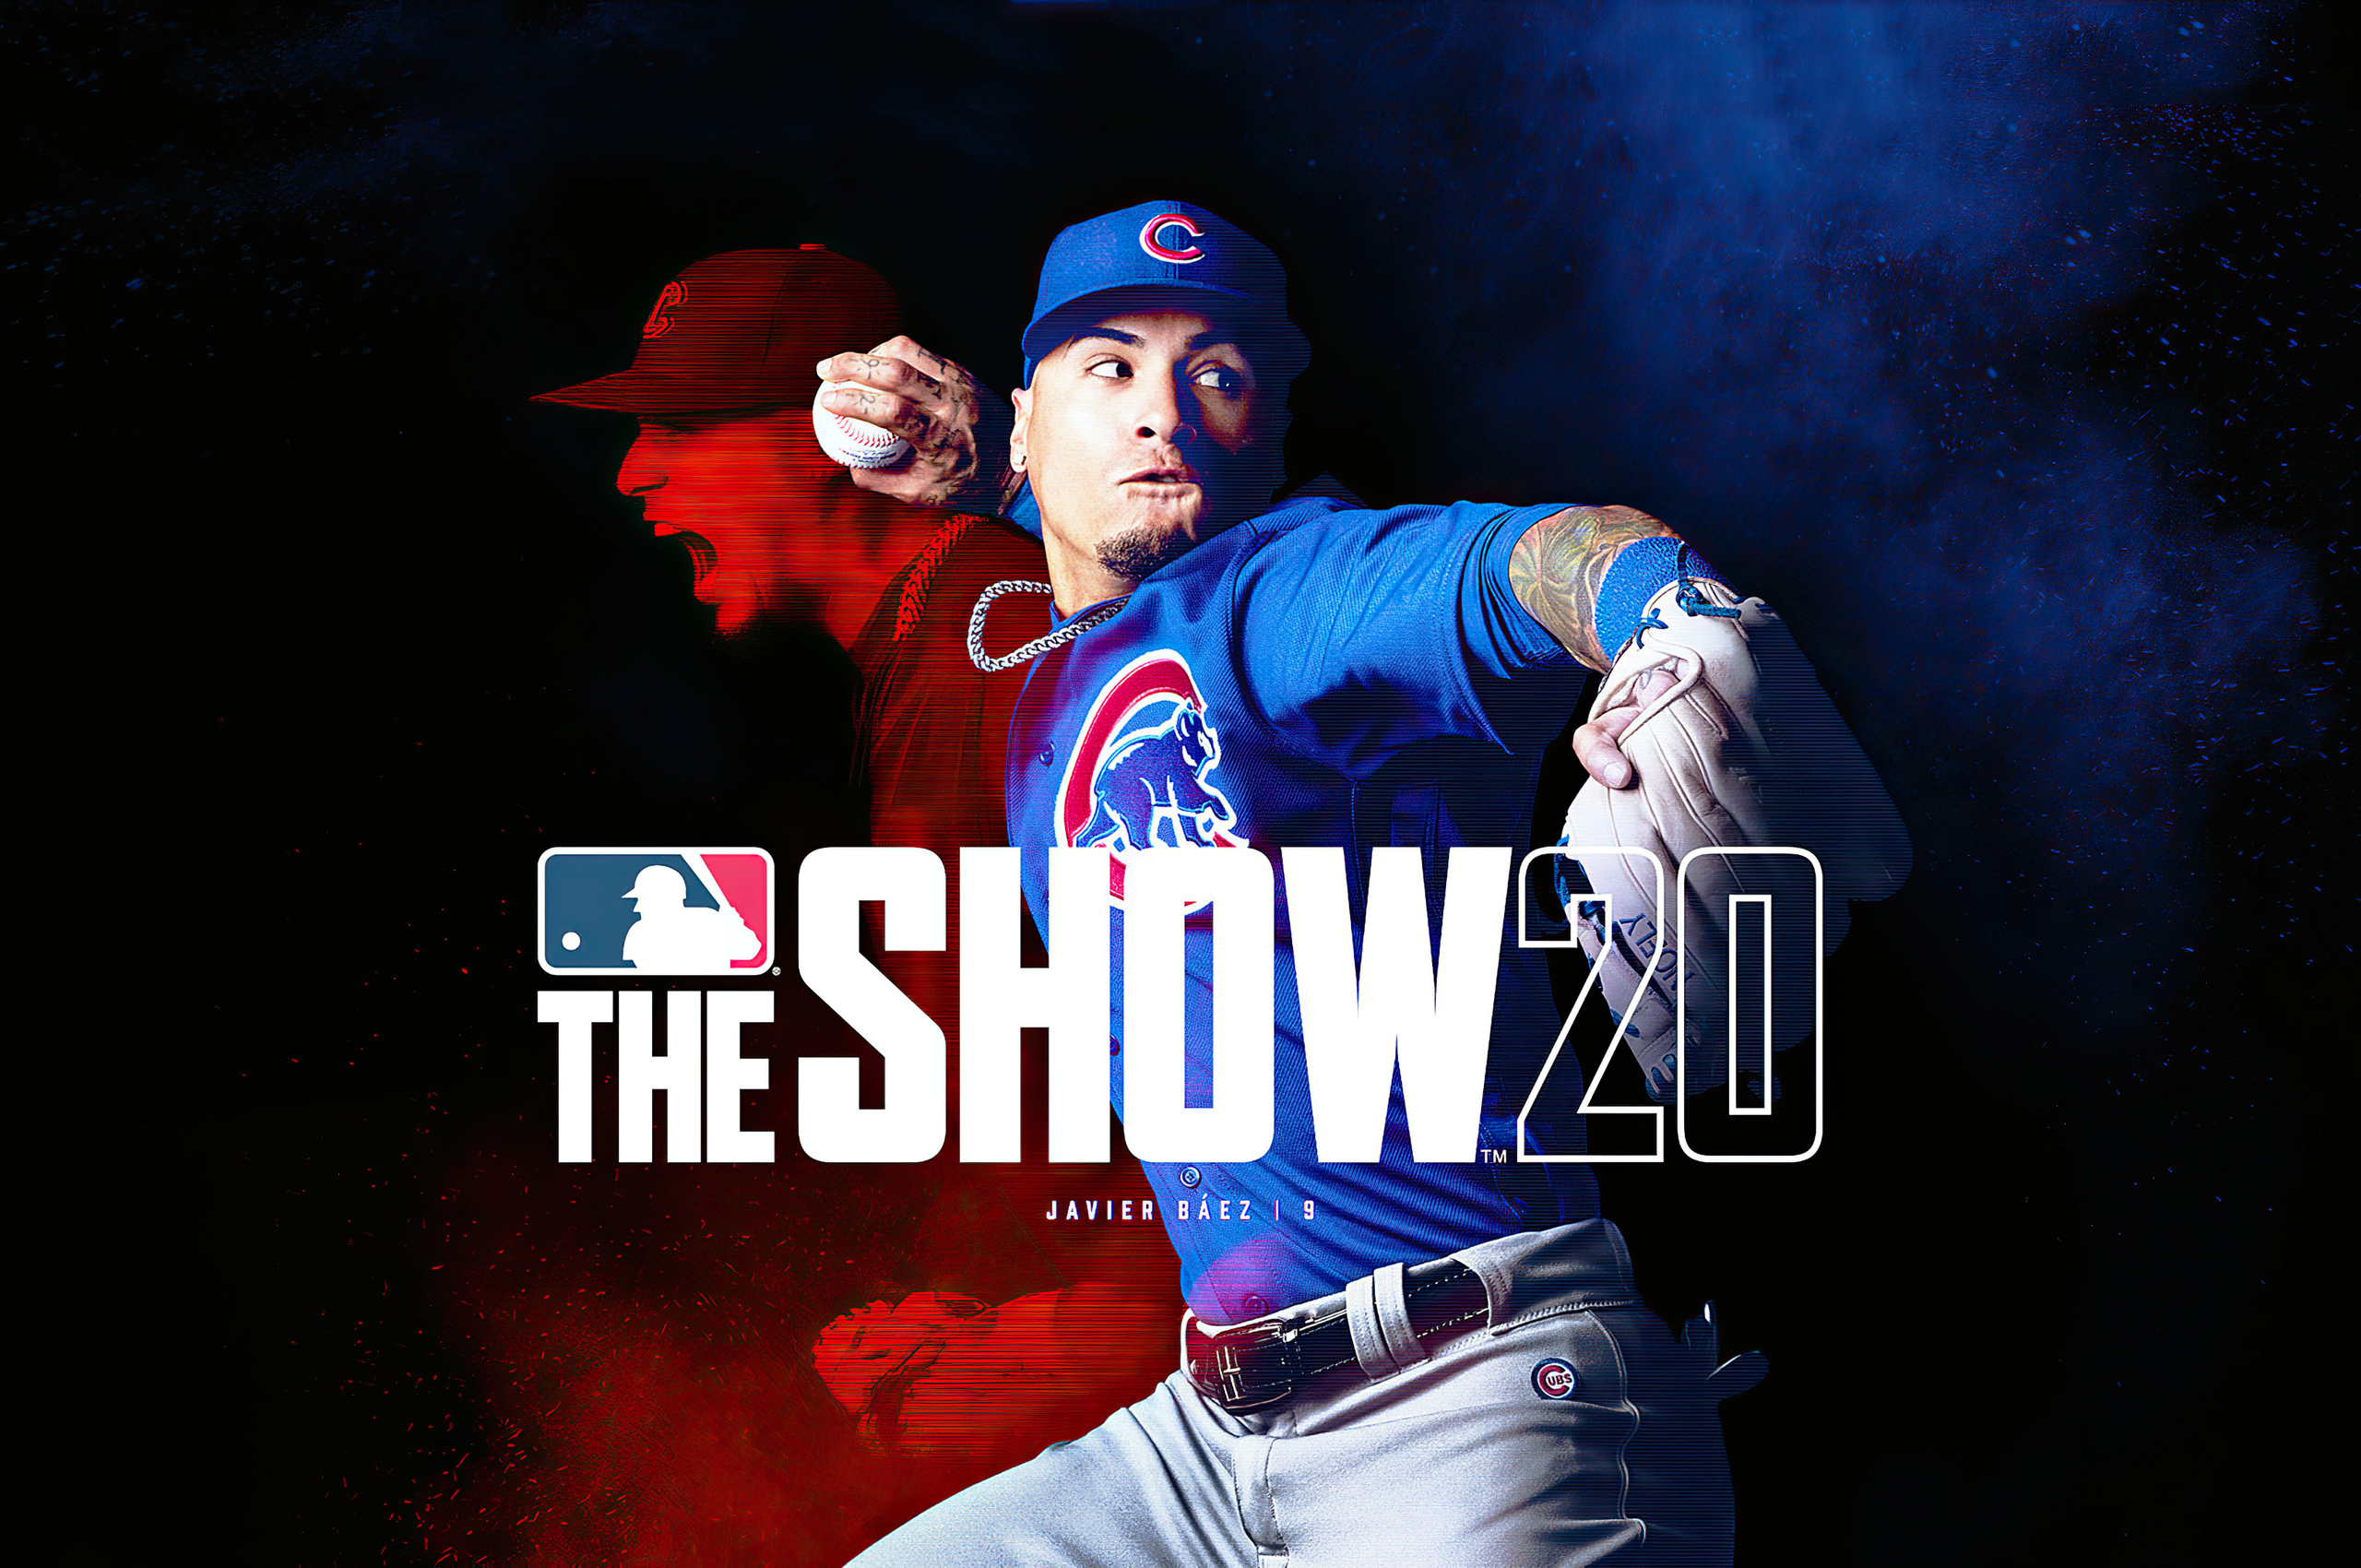 MLB The Show 20 In 2560x1700 Resolution. mlb-the-show-20-sw.jpg. 